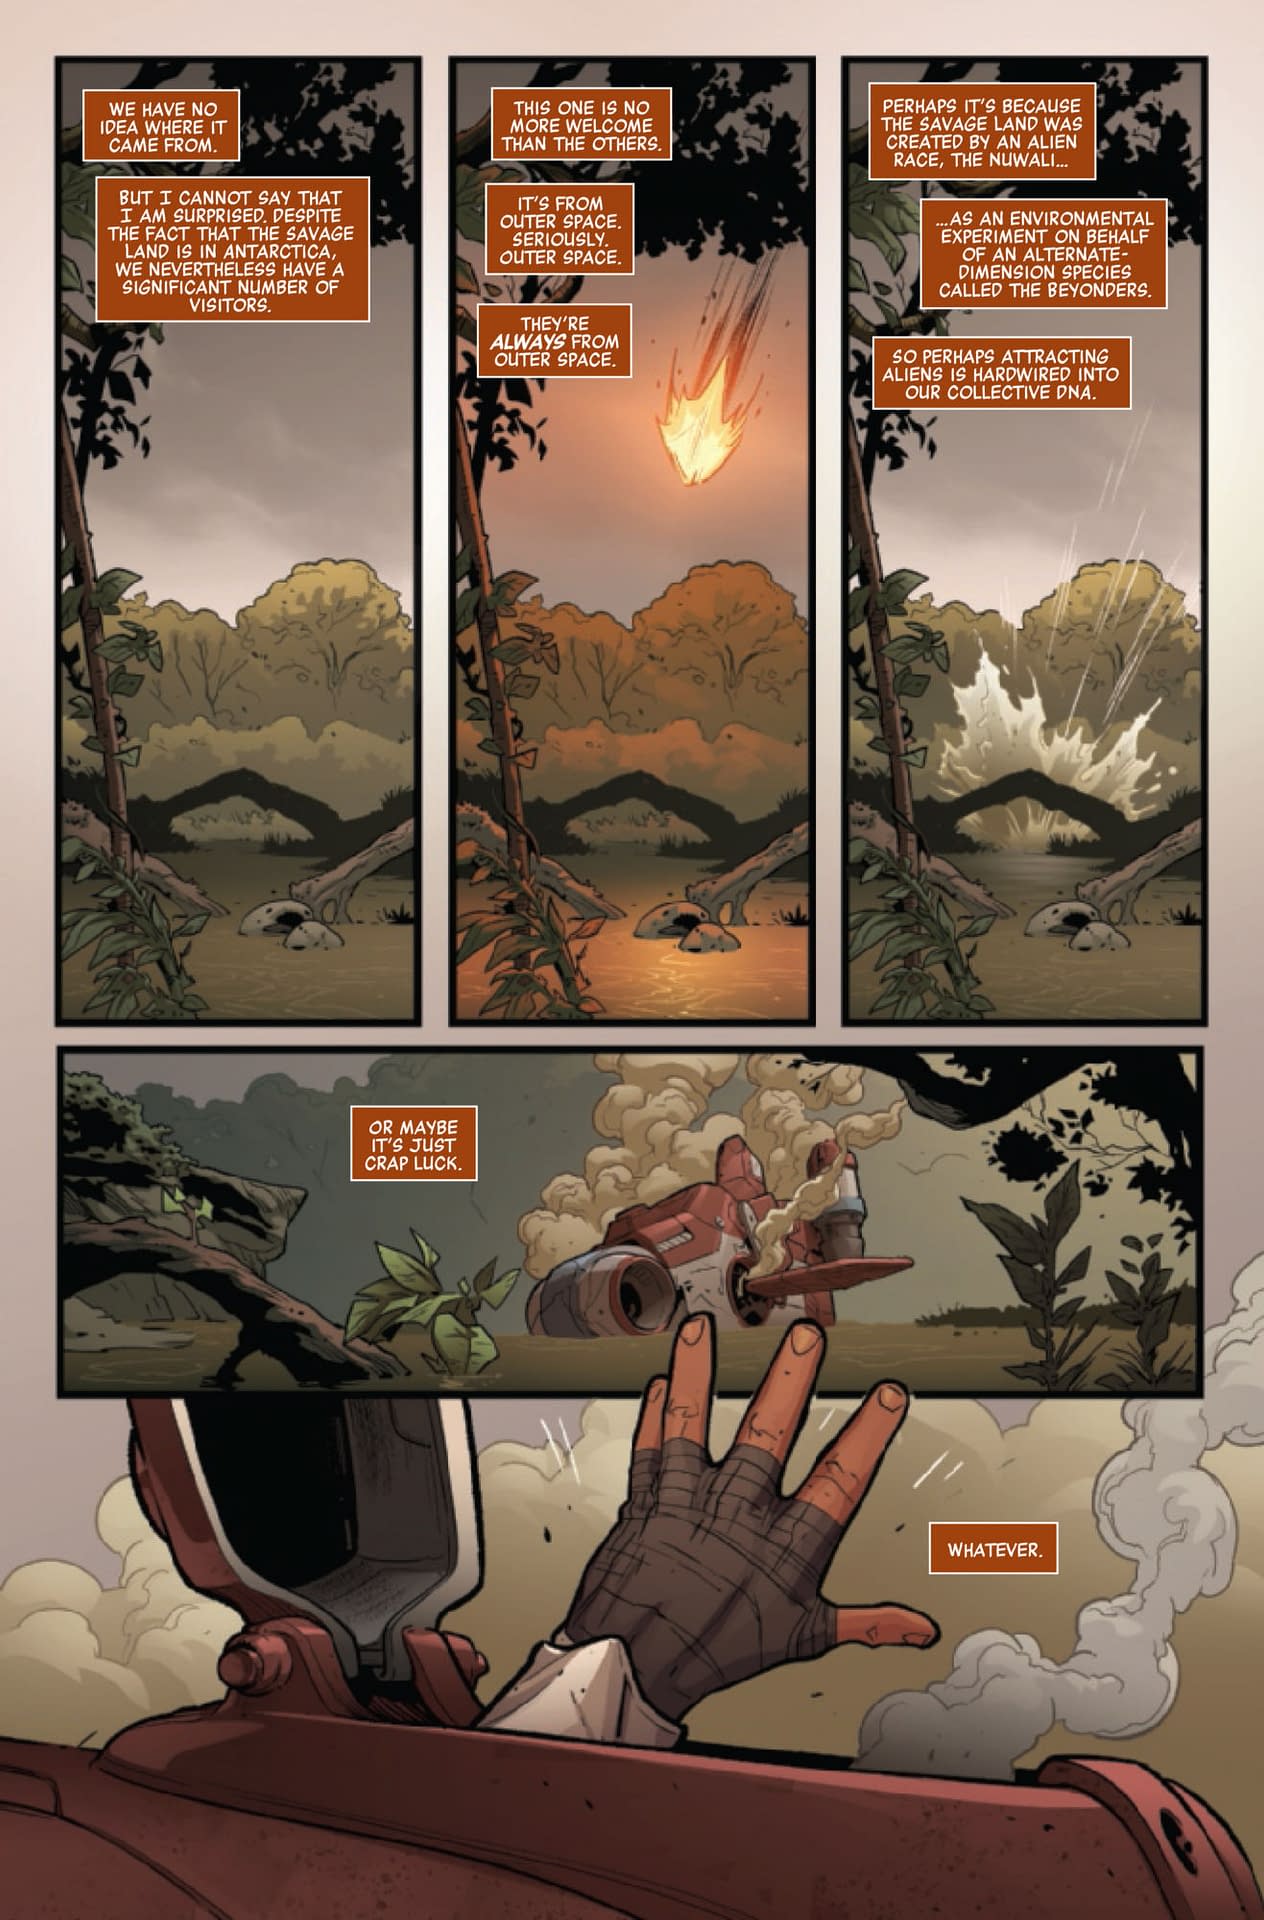 Anti-Immigrant Sentiment in the Savage Land - Fantastic Four: Prodigal Sun #1 Preview